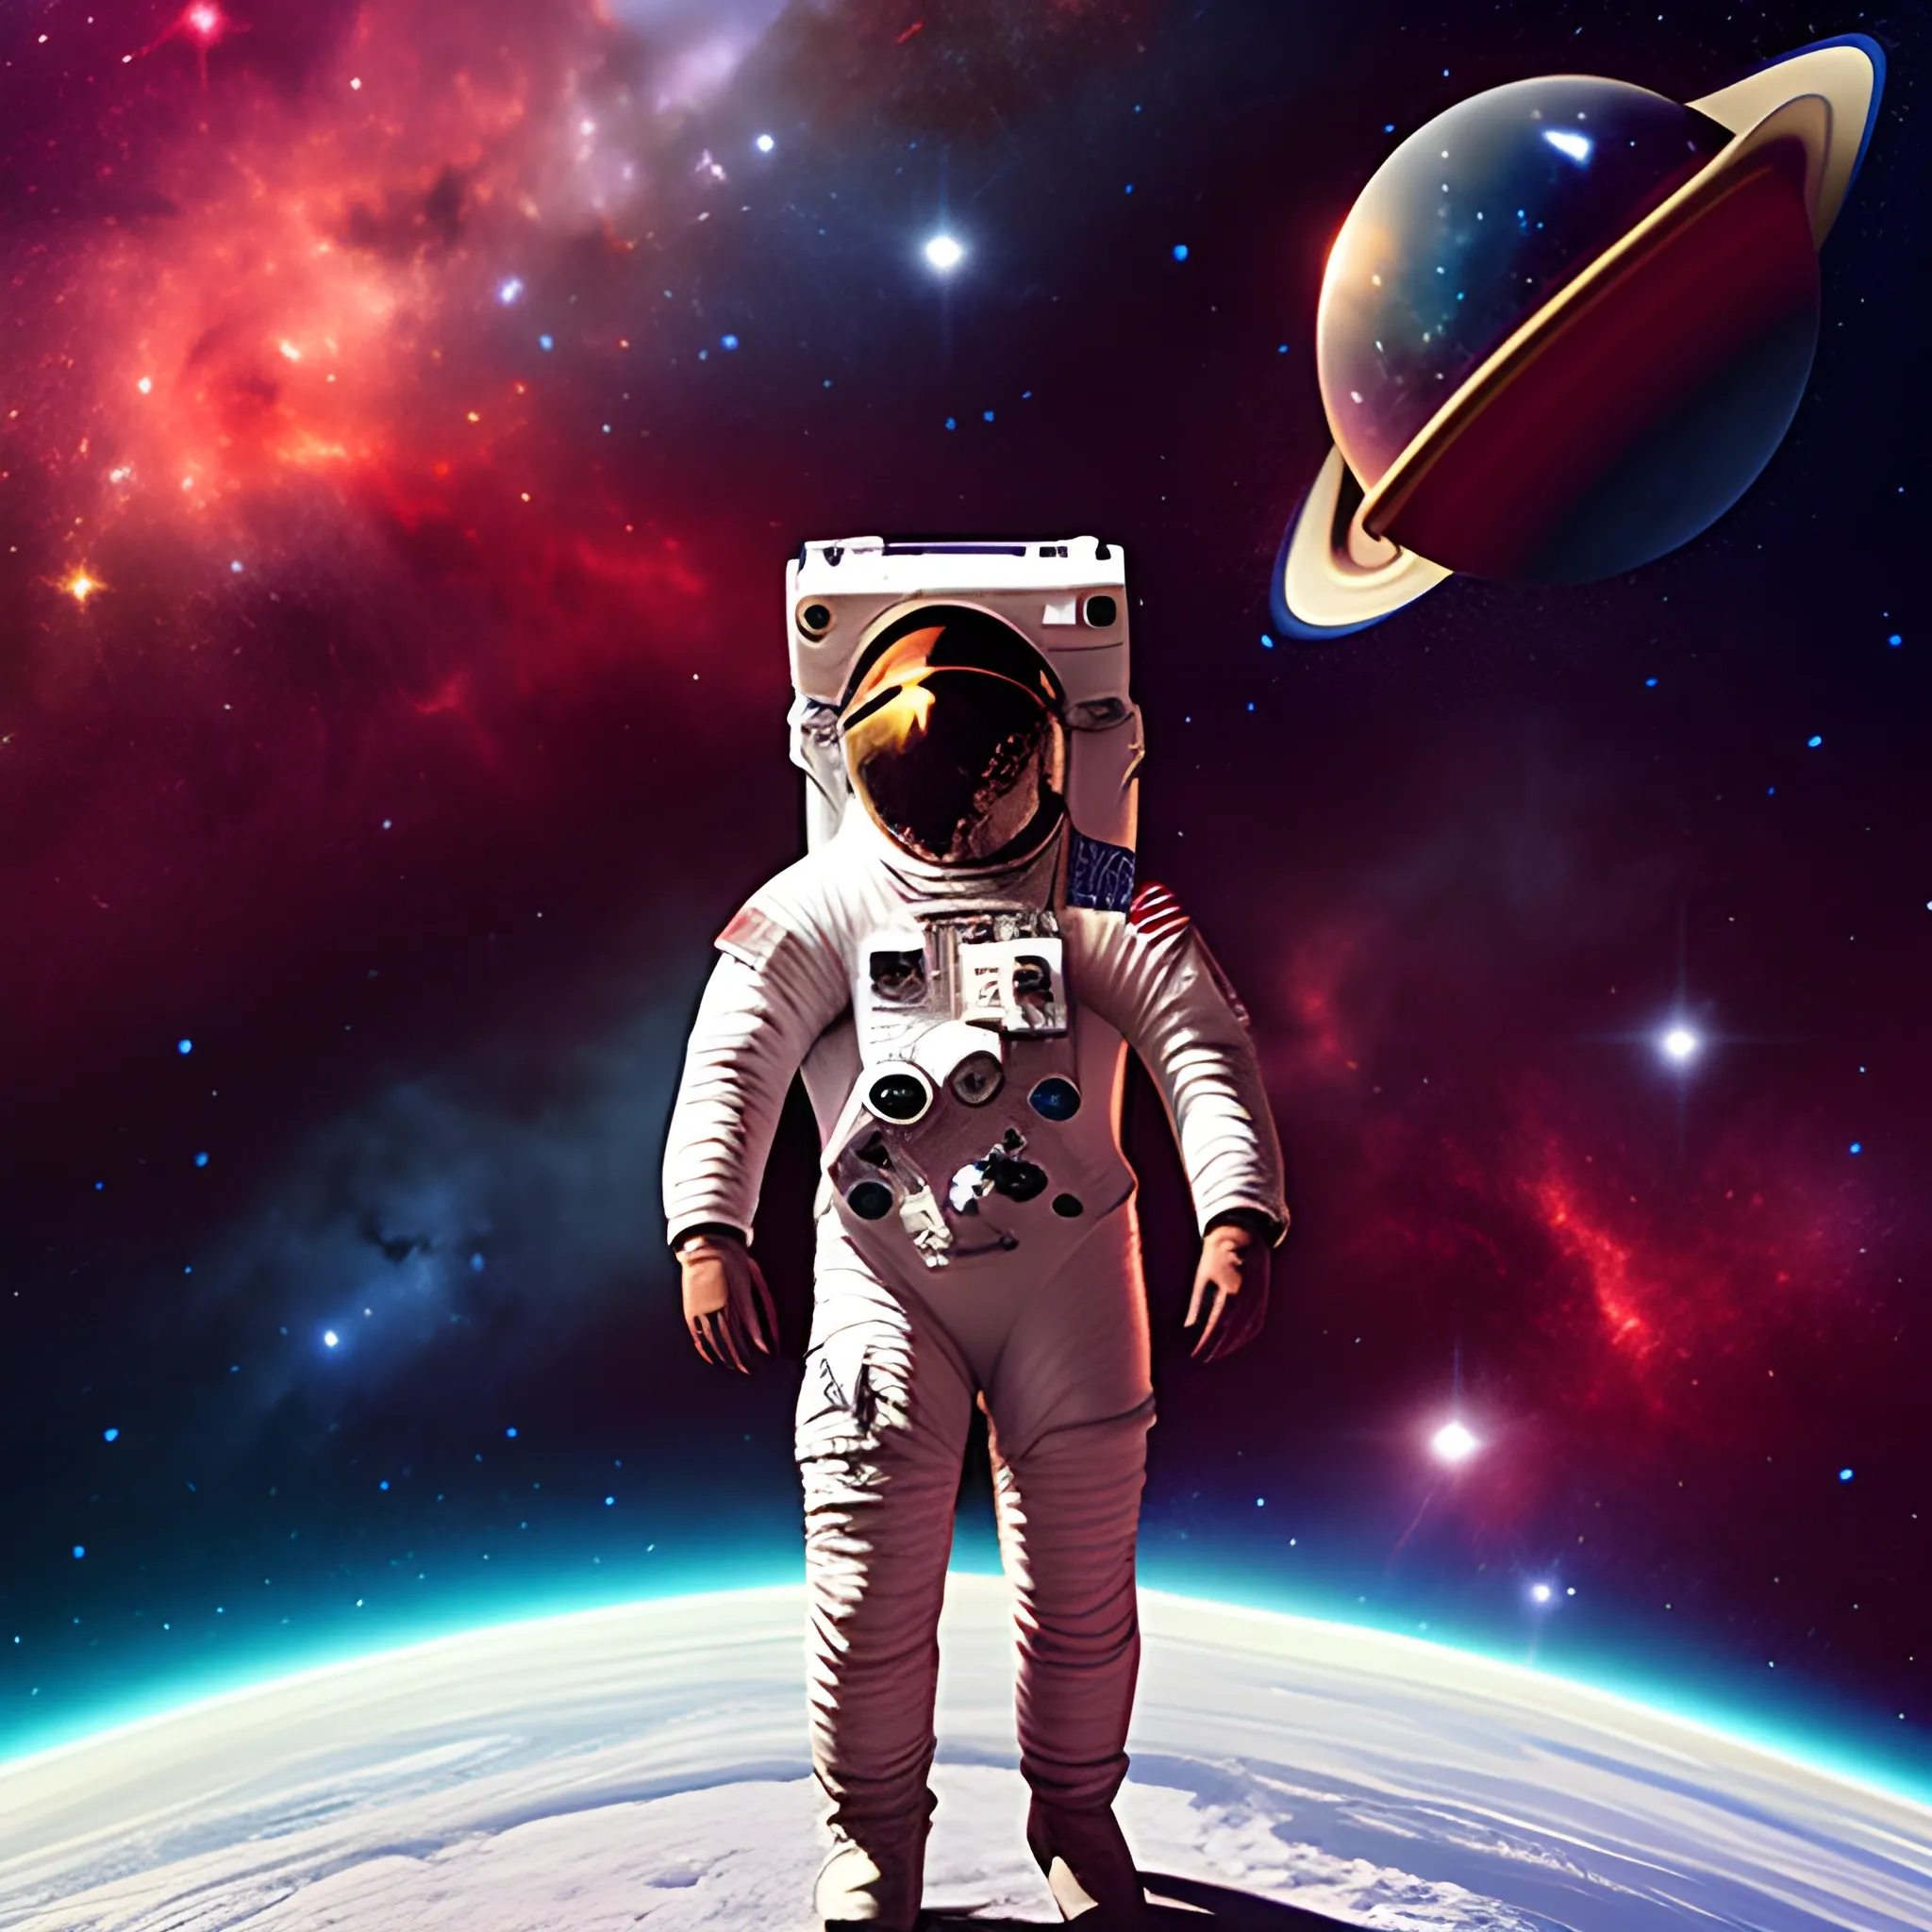 astronaut in planet superfice, red, galaxy background  